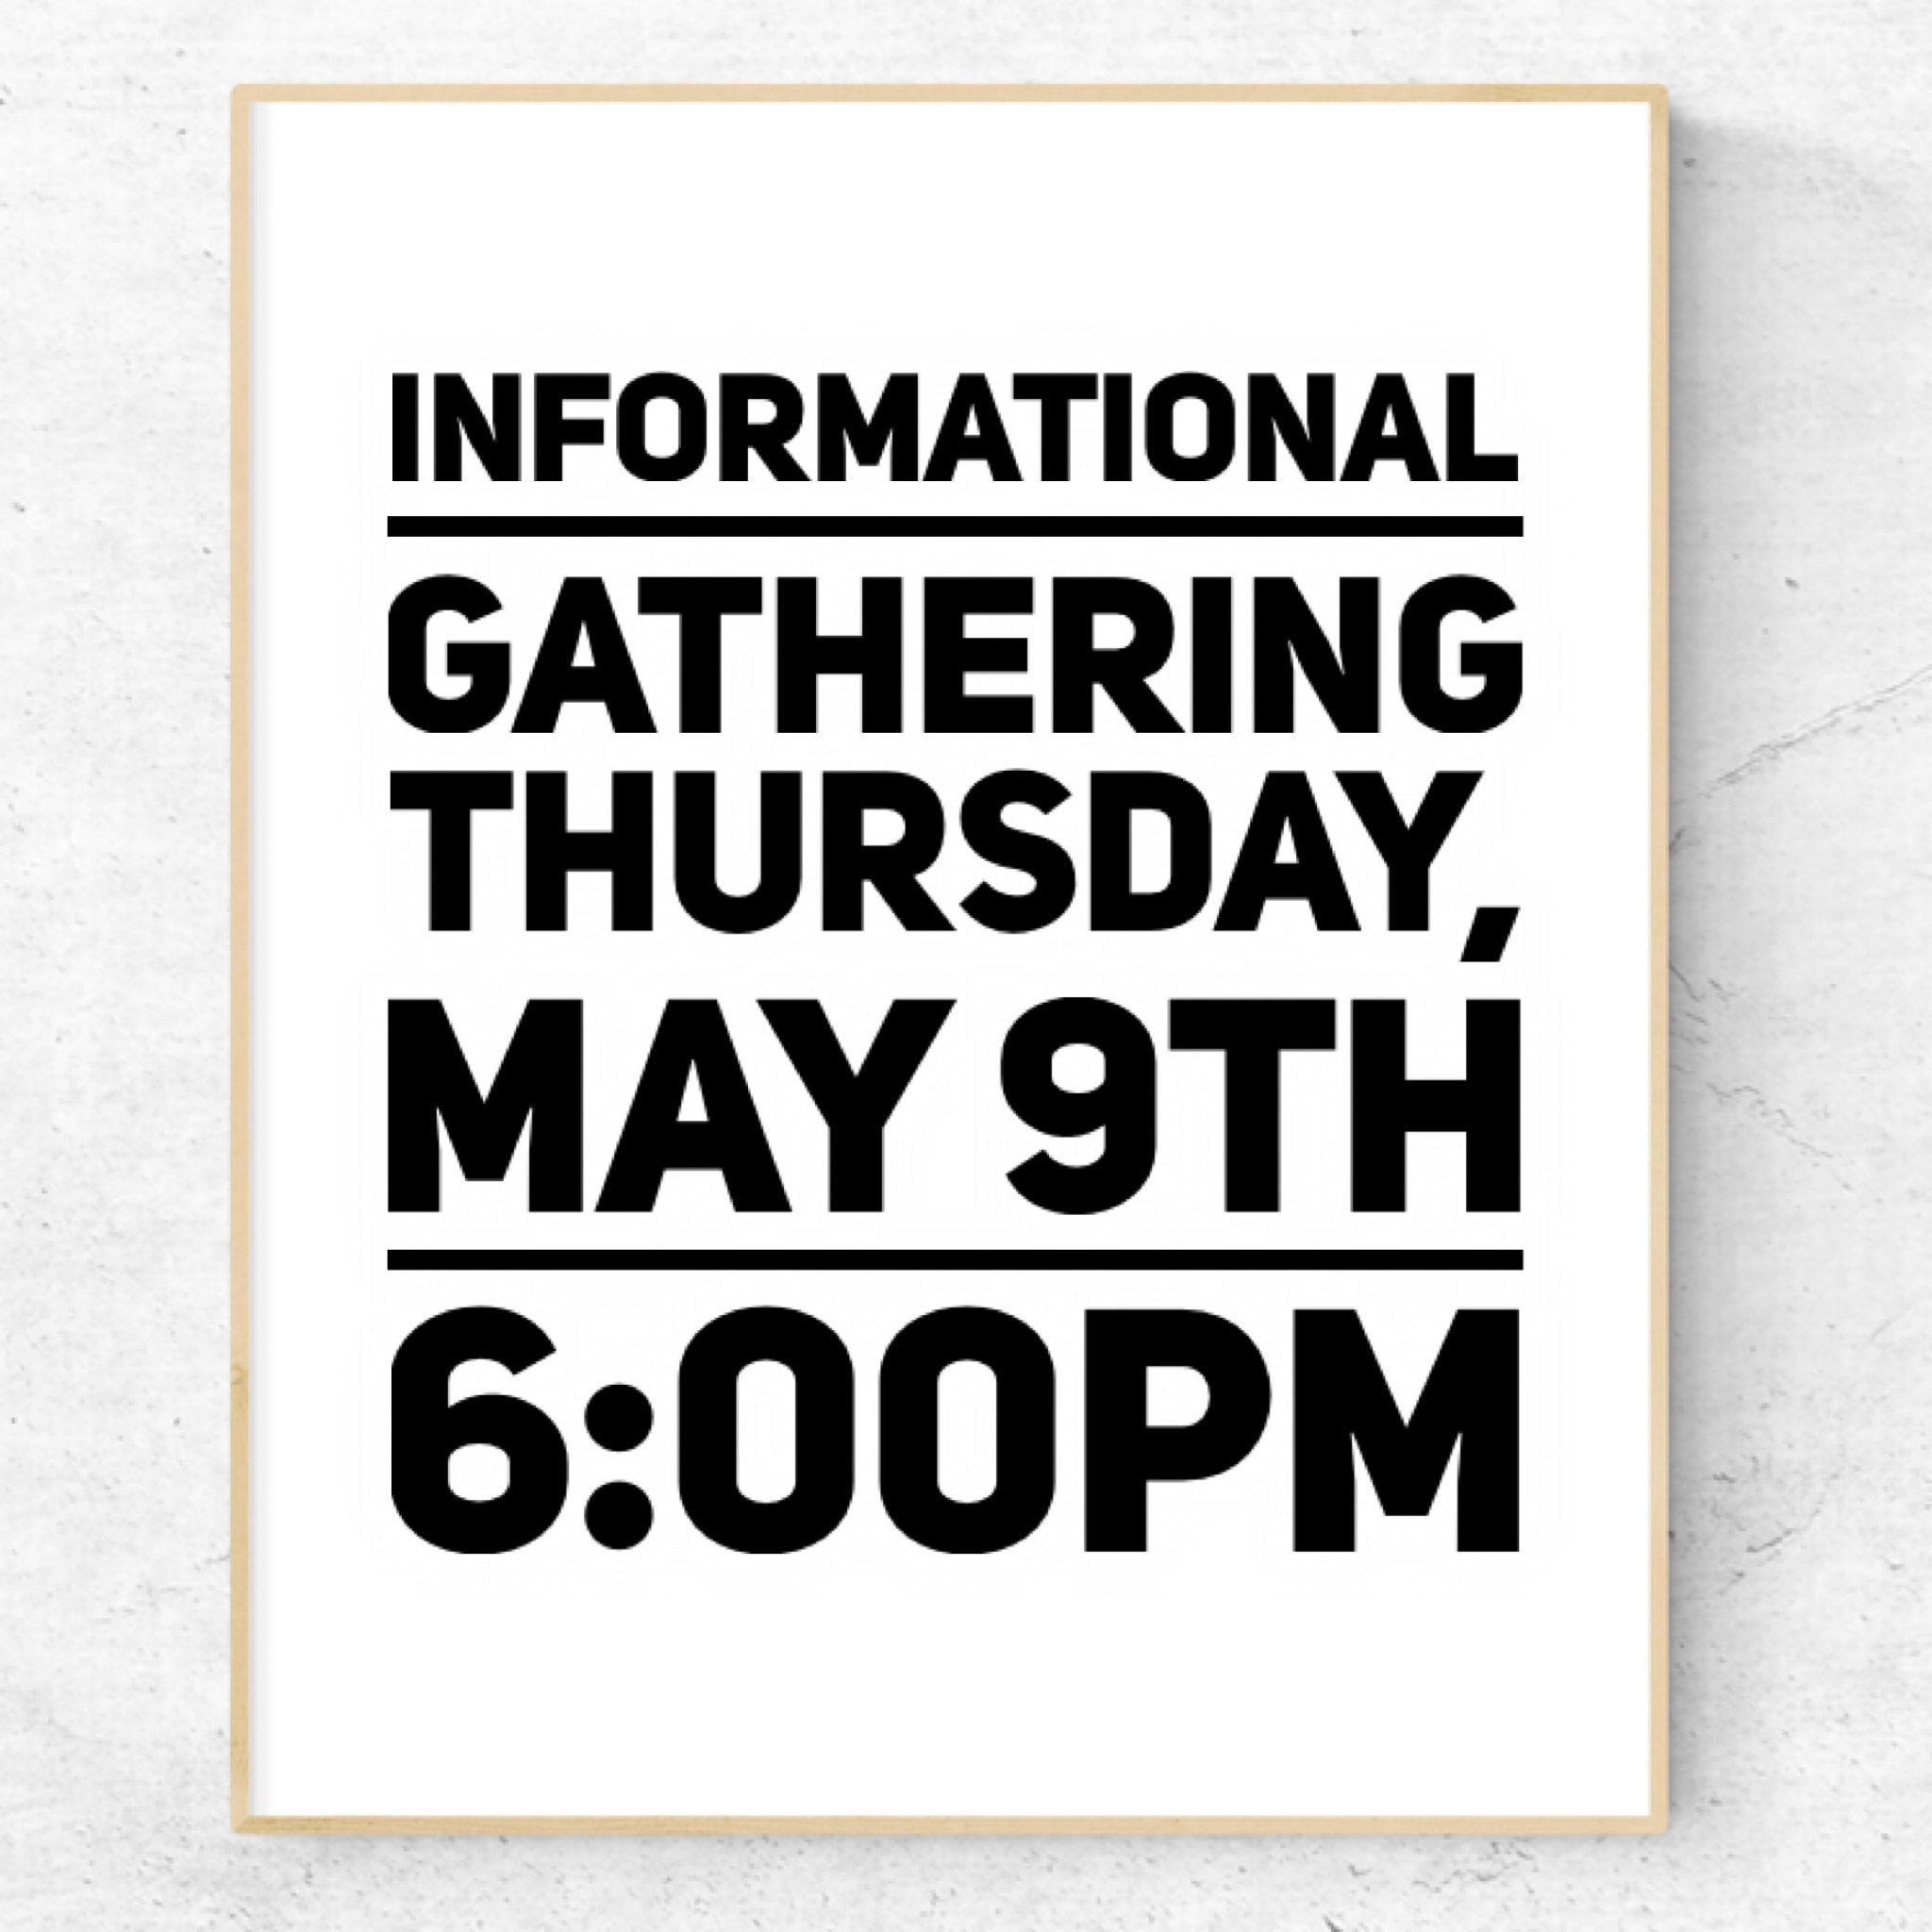 Informational Gathering &bull; Thursday, May 9th at 6pm in the sanctuary. 
Our District Superintendent, Rev. Dr. Rick Owen, will join us to share and answer questions you might have about General Conference. Hope to see you there.